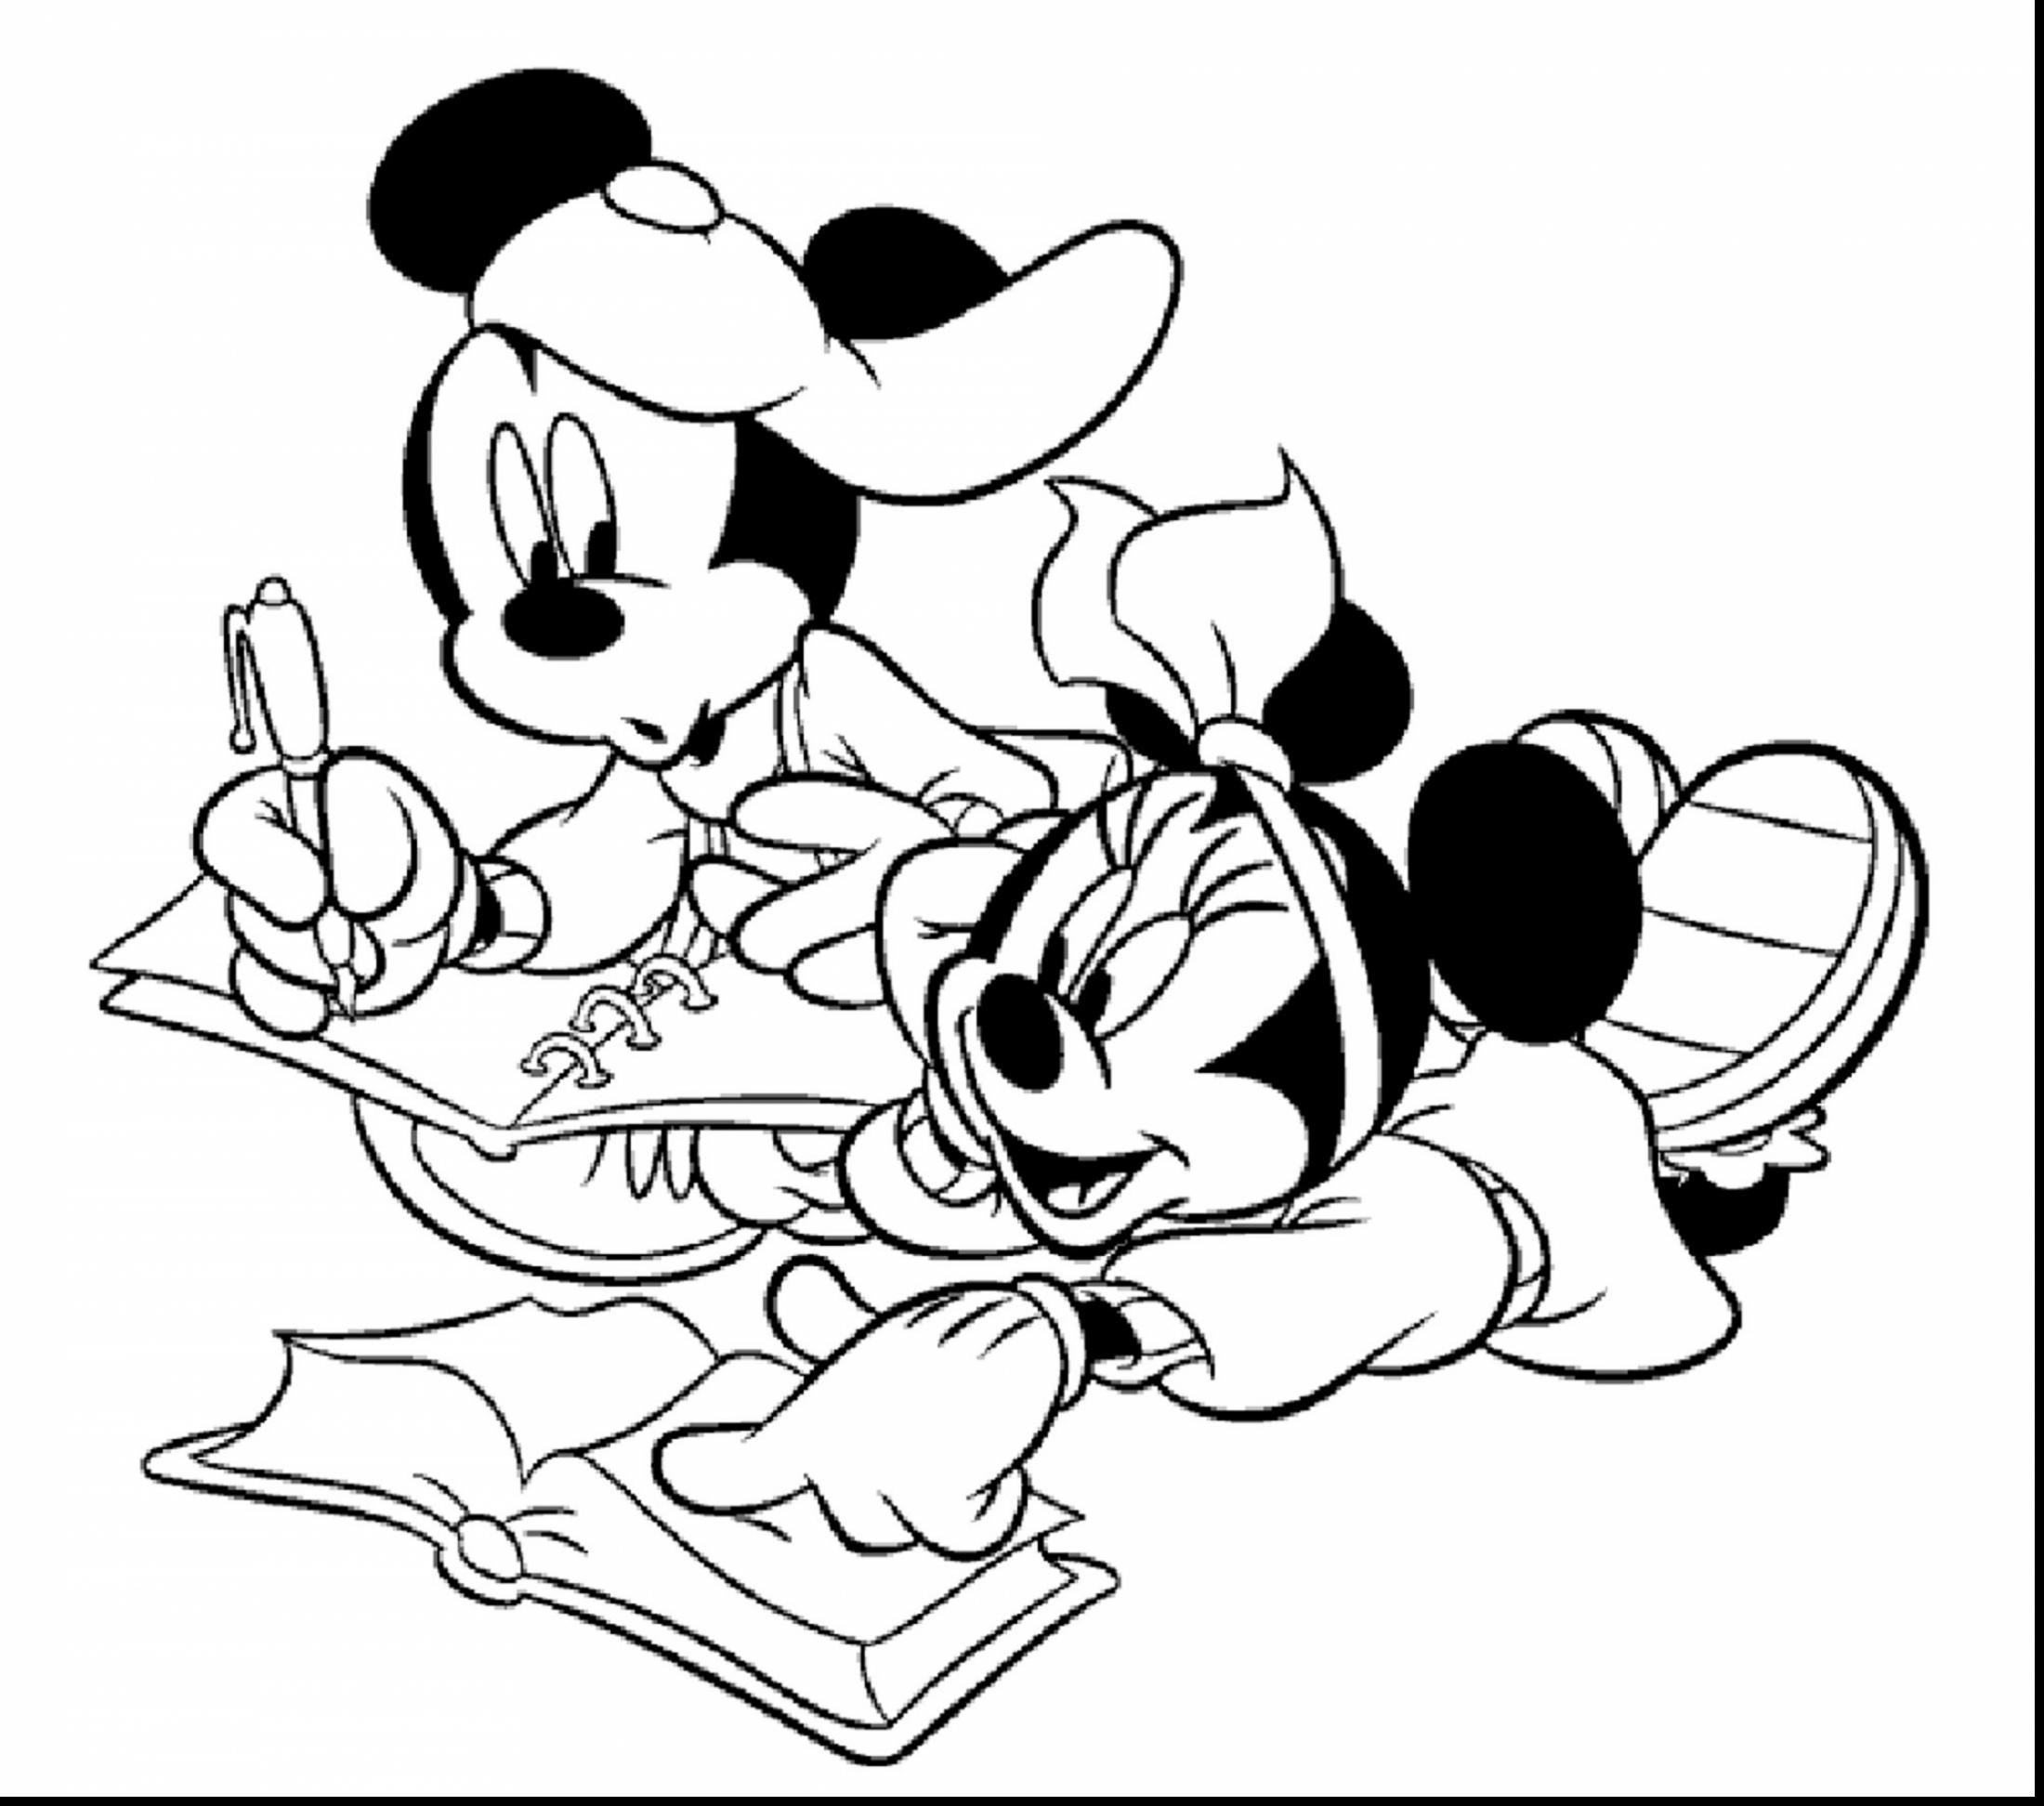 Mickey And Minnie Coloring Pages To Print Coloring Pages Mickey Minnie Mouseing Pages